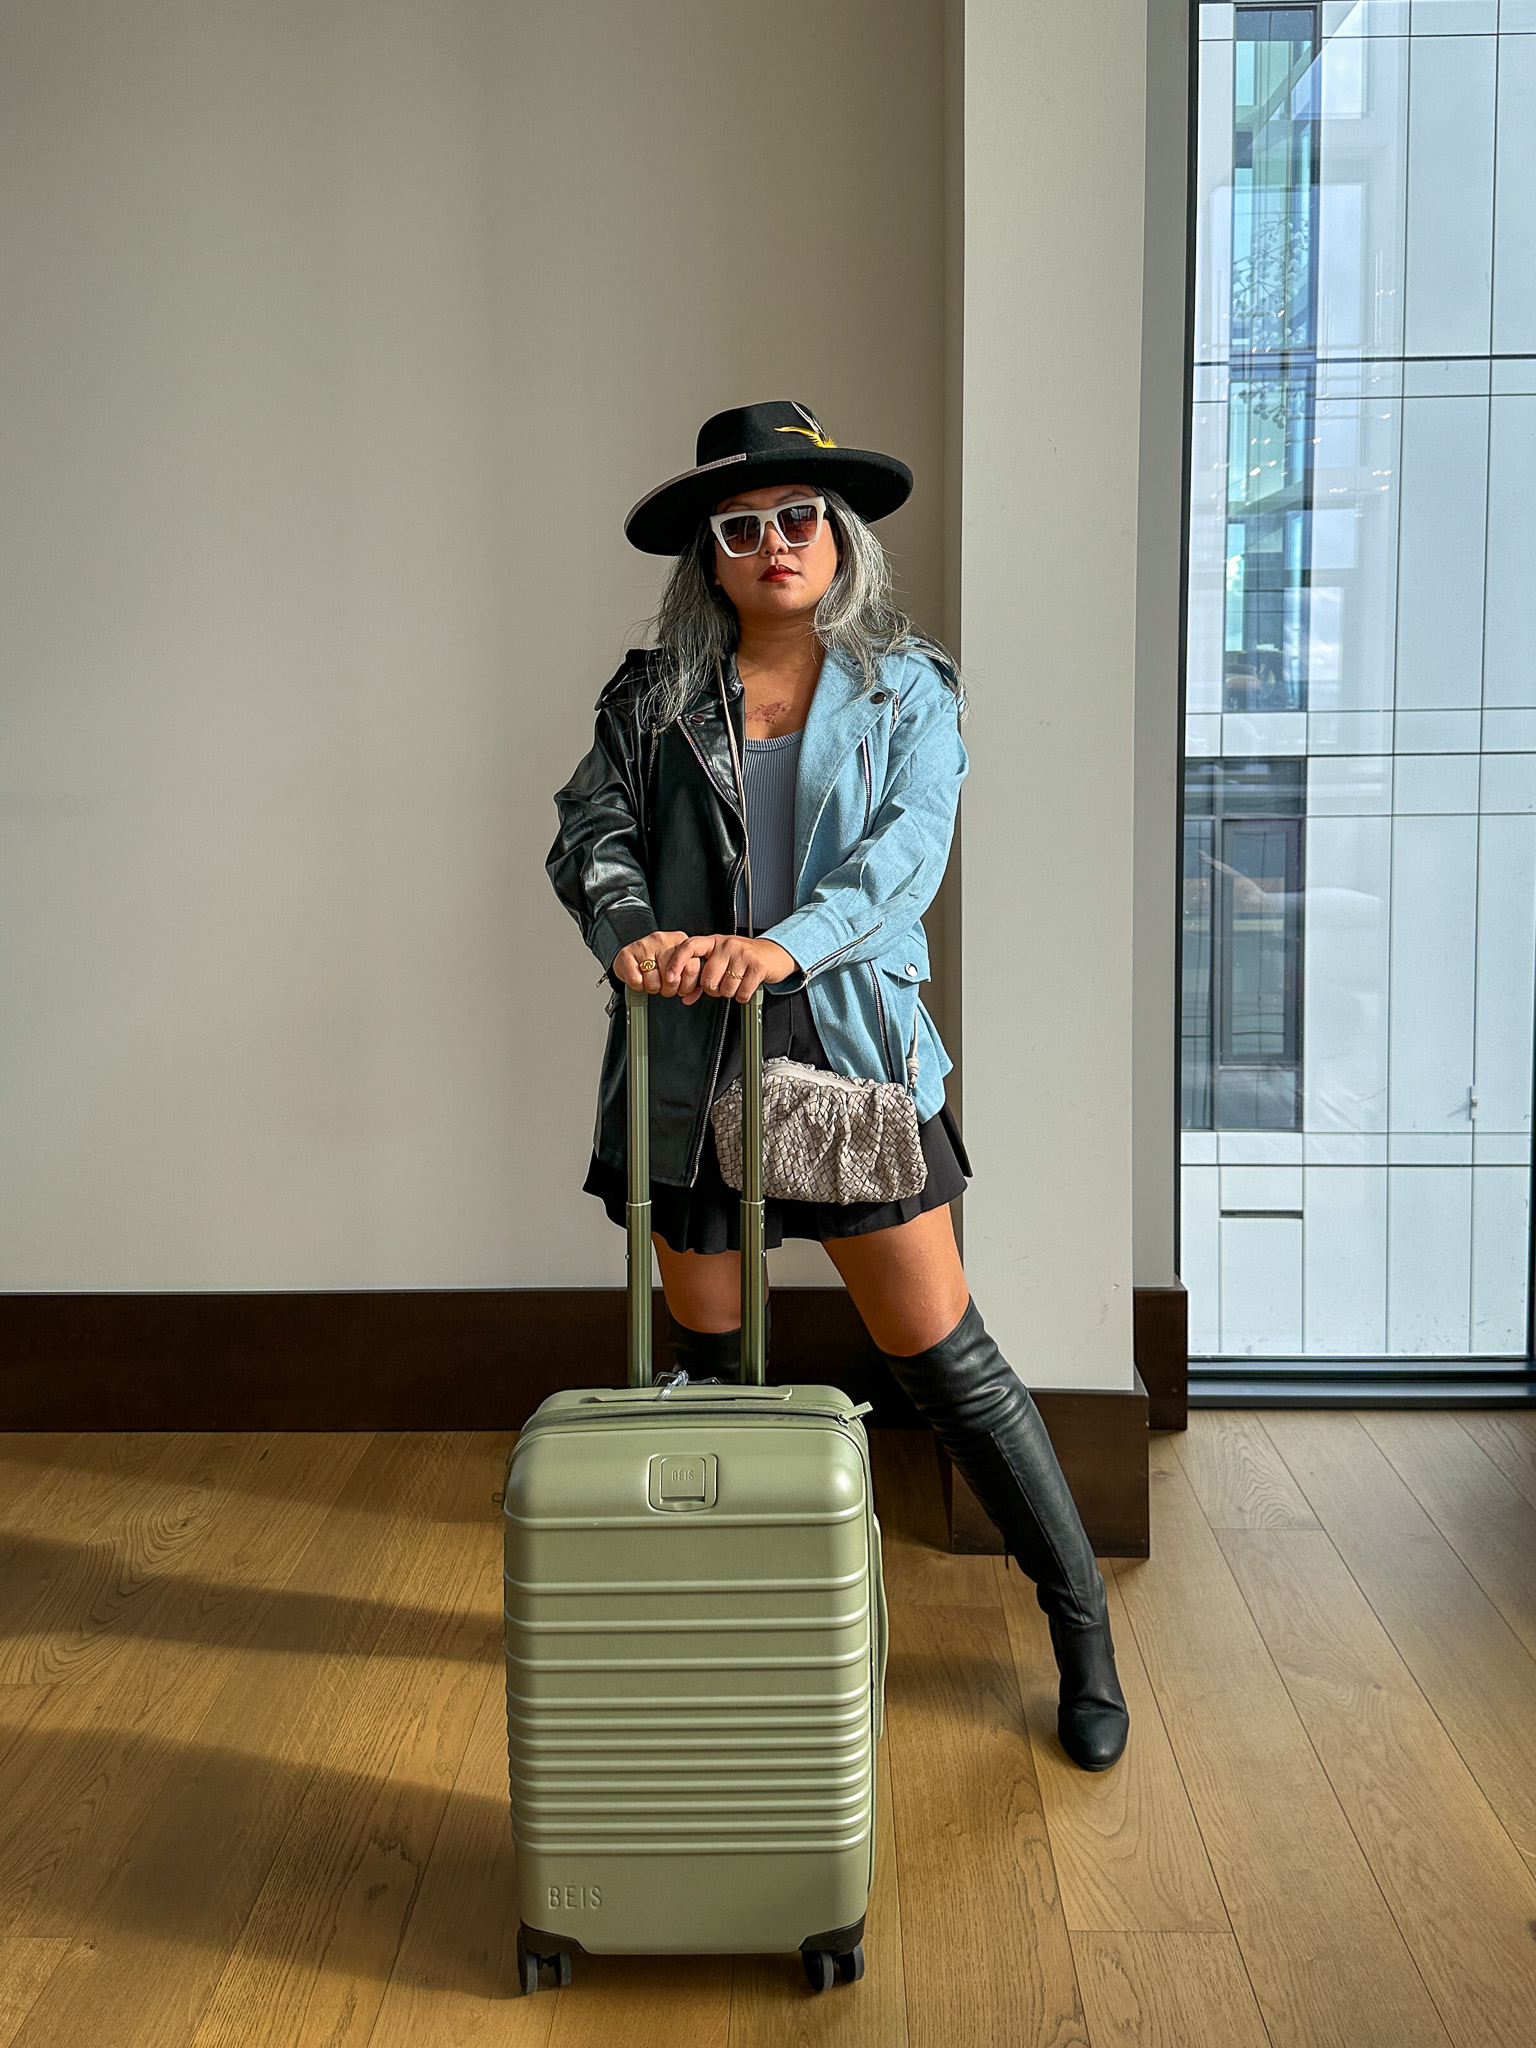 BEIS Luggage review carry on suitcase dreampairs boots susushell skirt saint owen sunglasses latico noble crossbody american hat makers fedora hat loragal denim leather jacket